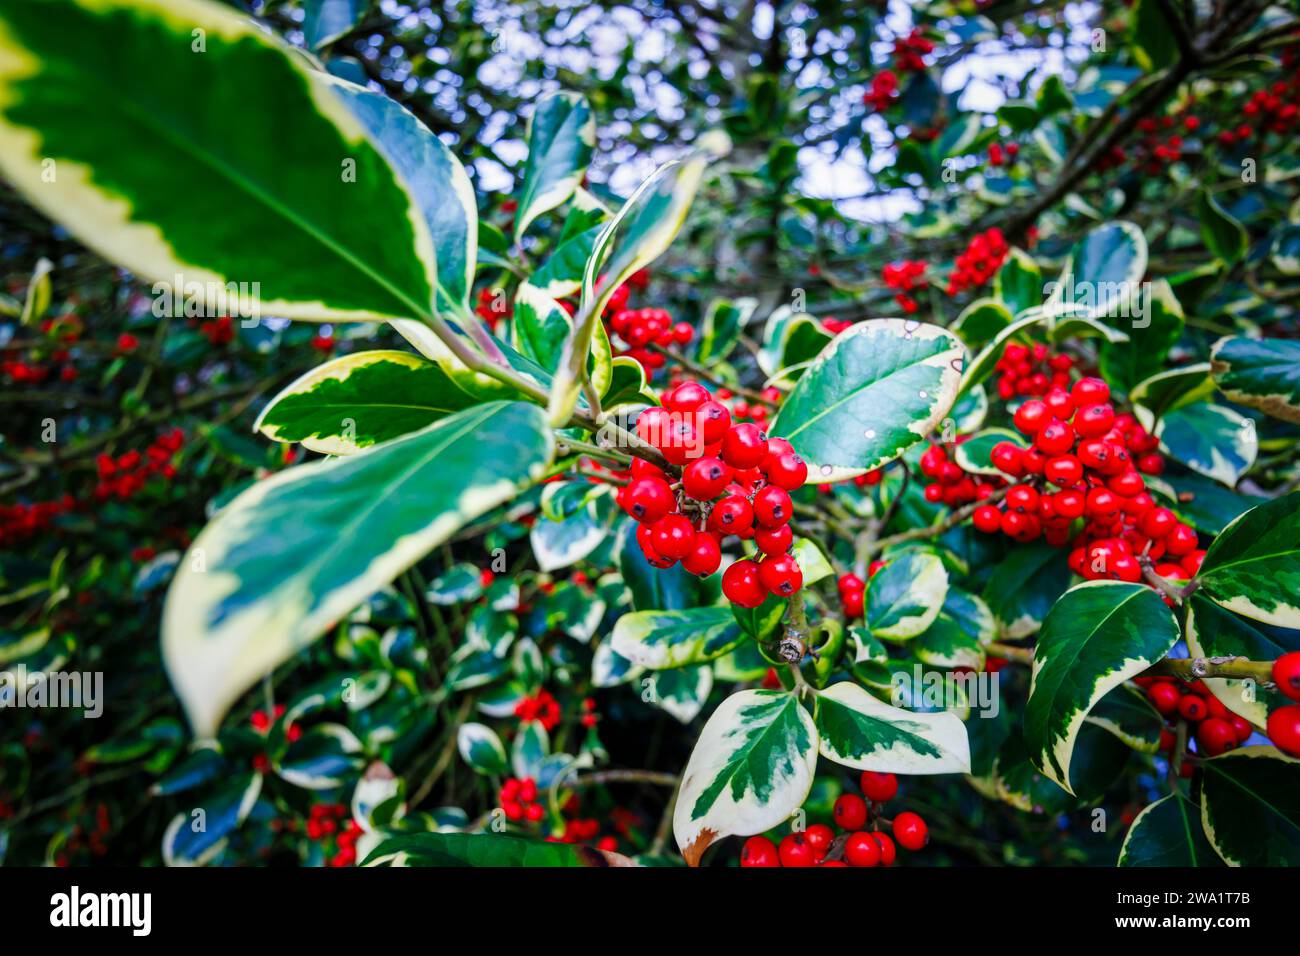 Evergreen variegated holly (female) Ilex x altaclerensis 'Golden King' small tree / shrub with waxy bright red berries and foliage and leaves Stock Photo